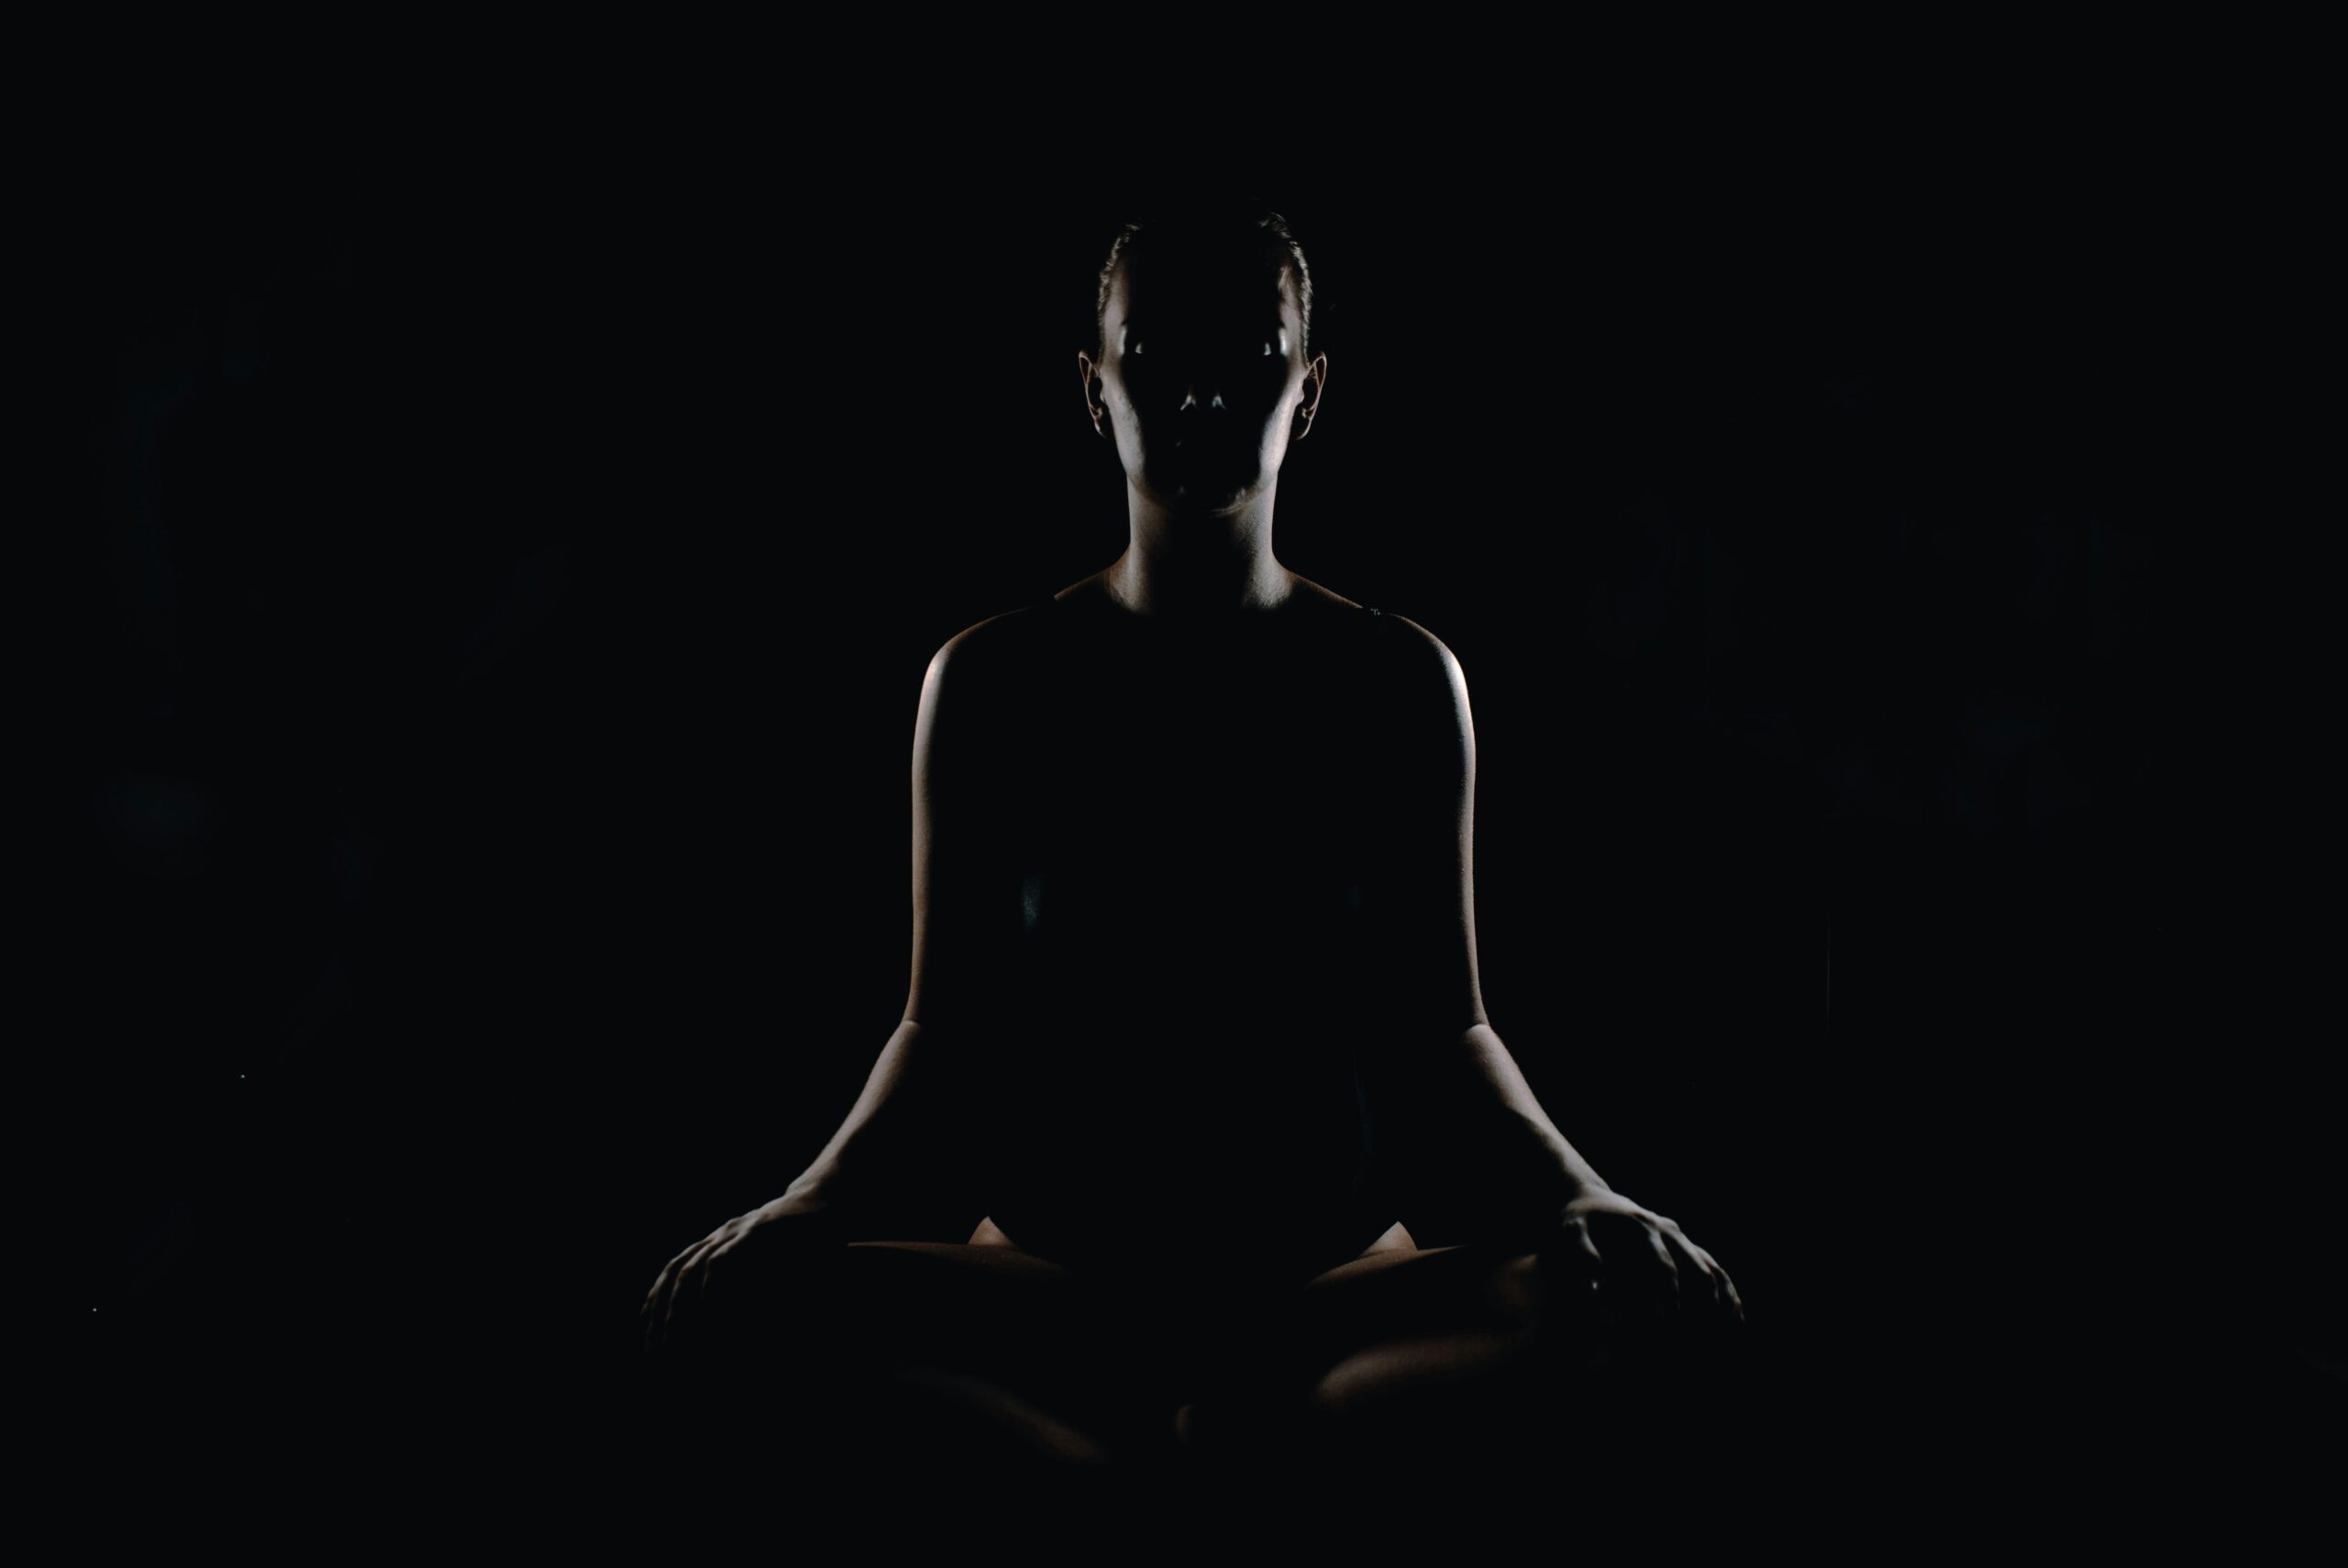 Silhouette of a person meditating cross-legged